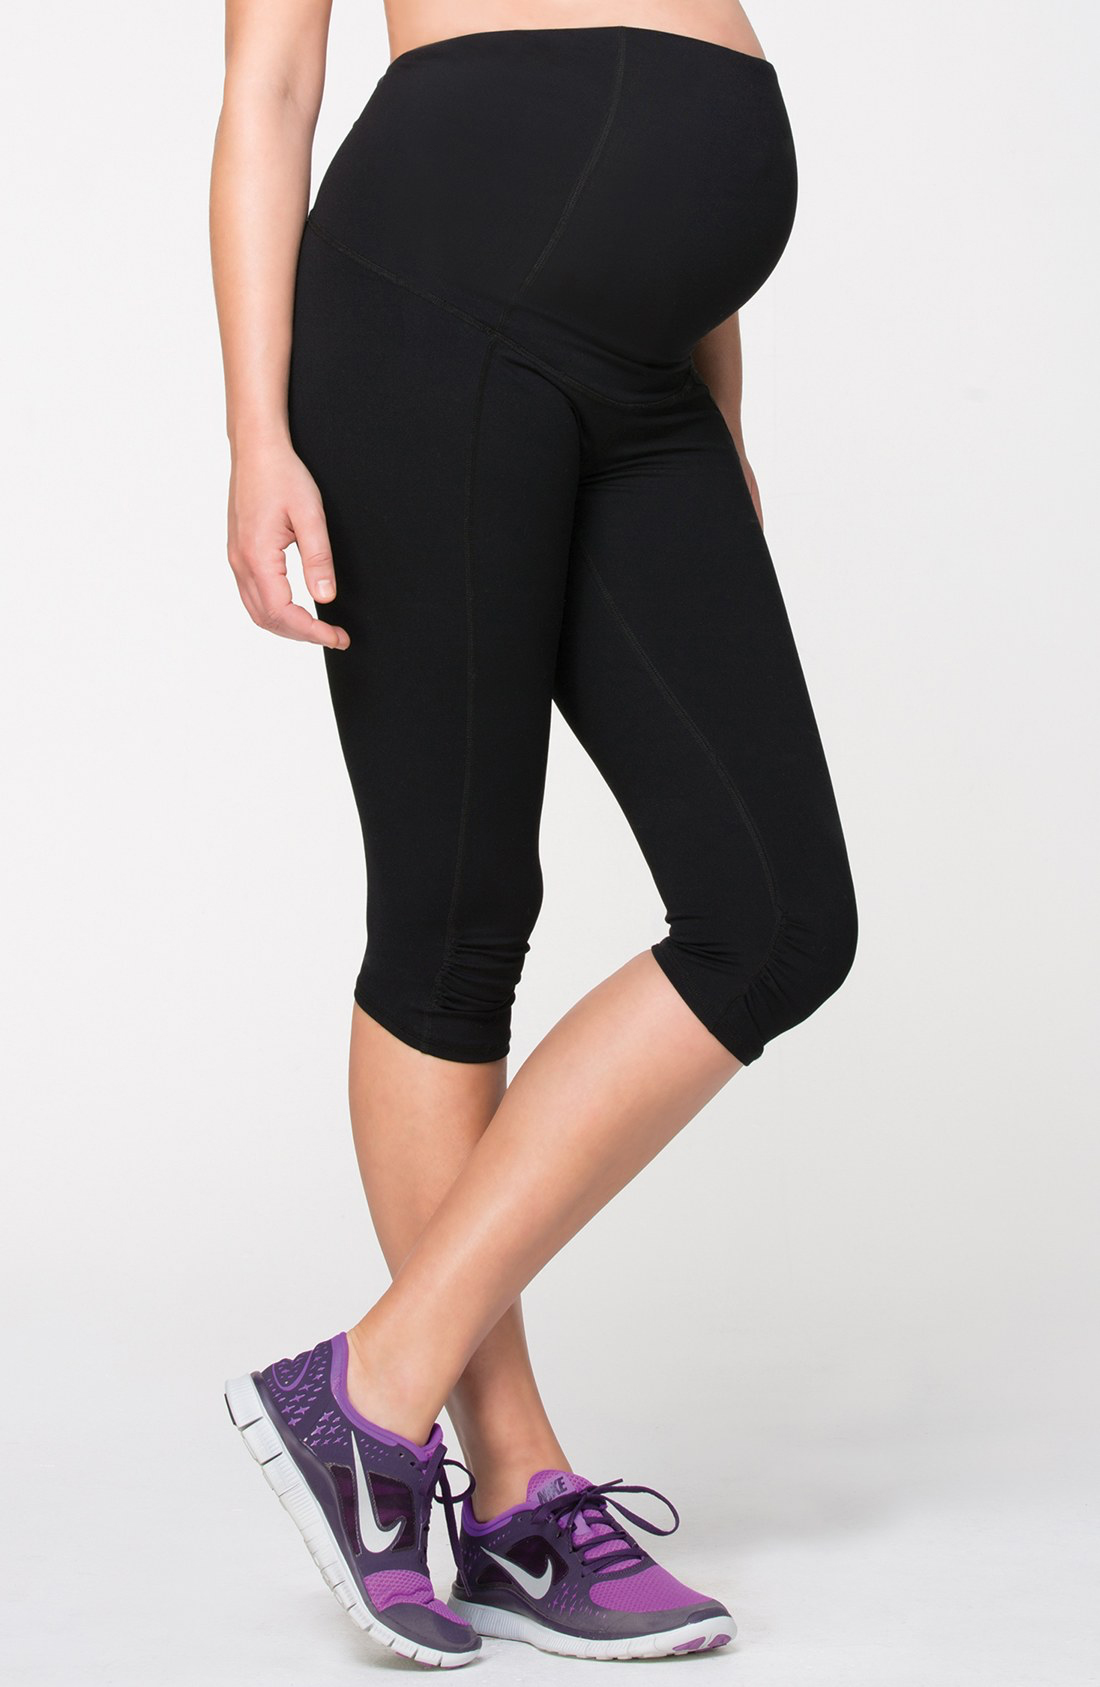 Maternity Workout Pants from Nordstrom